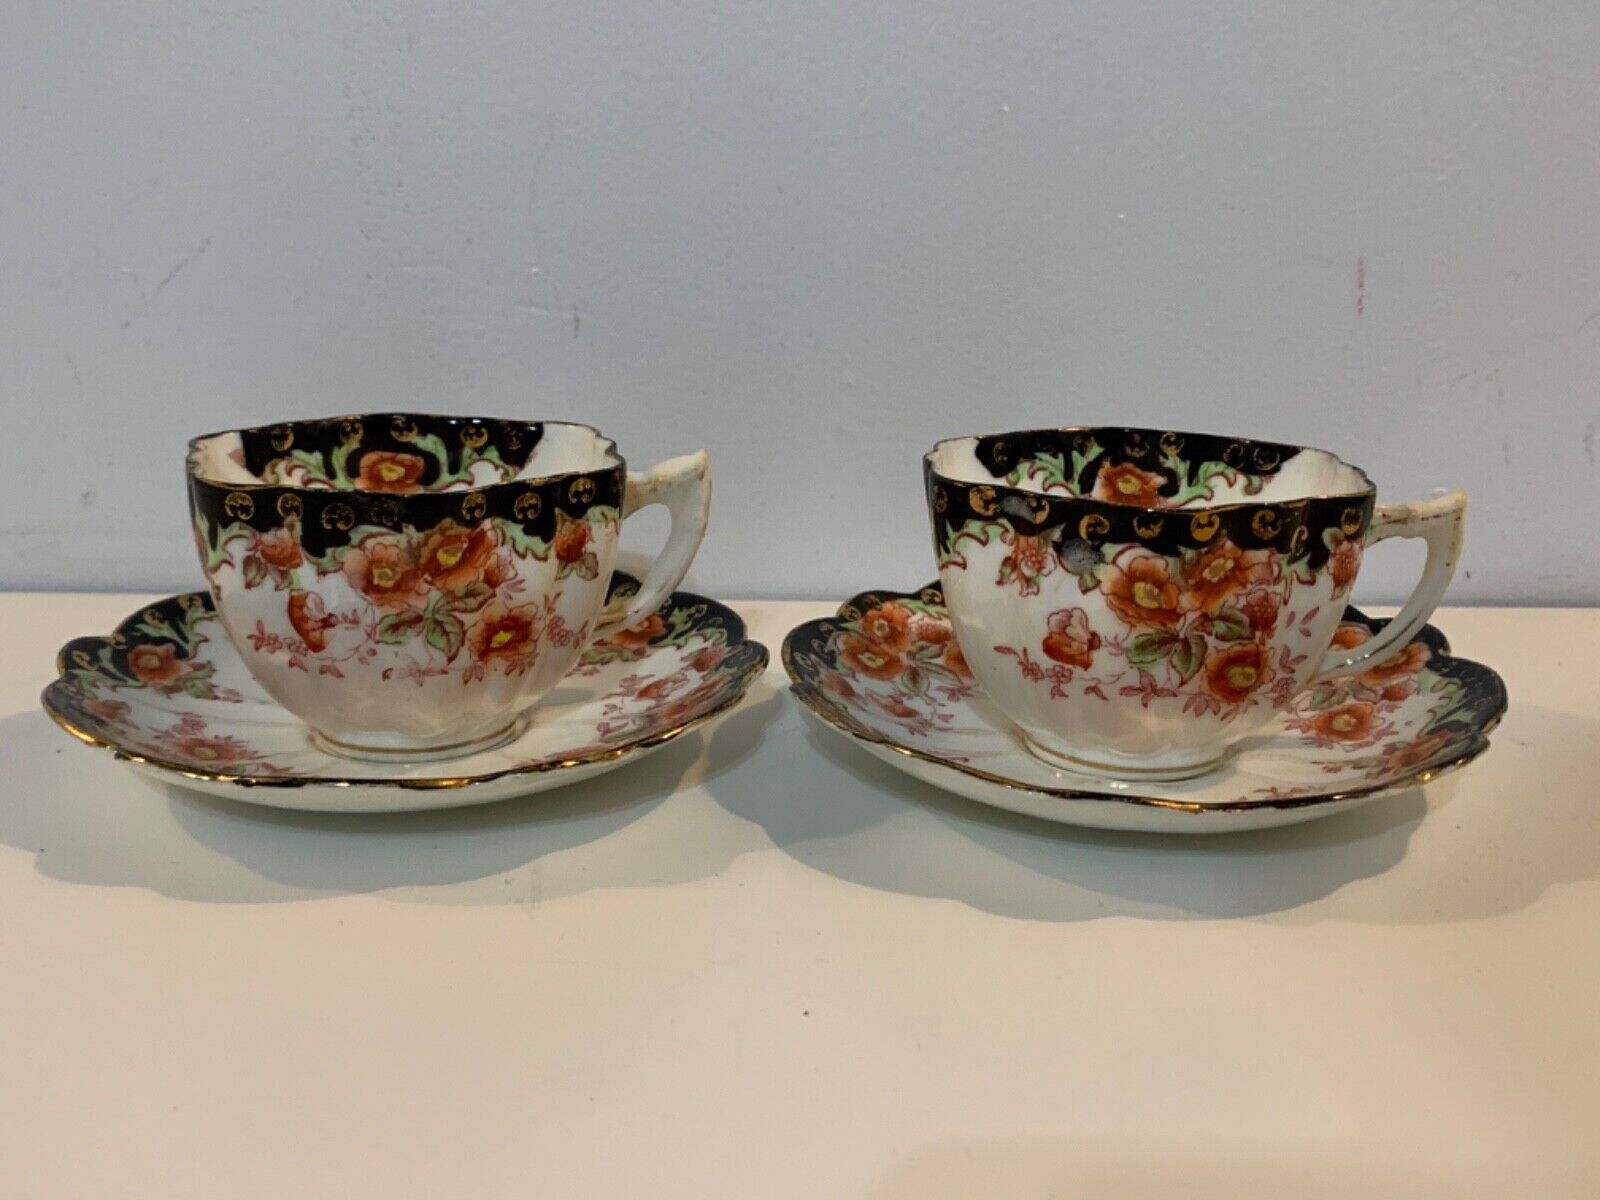 Antique Possibly Derby Pair of Porcelain Cups & Saucers with Painted Floral Dec